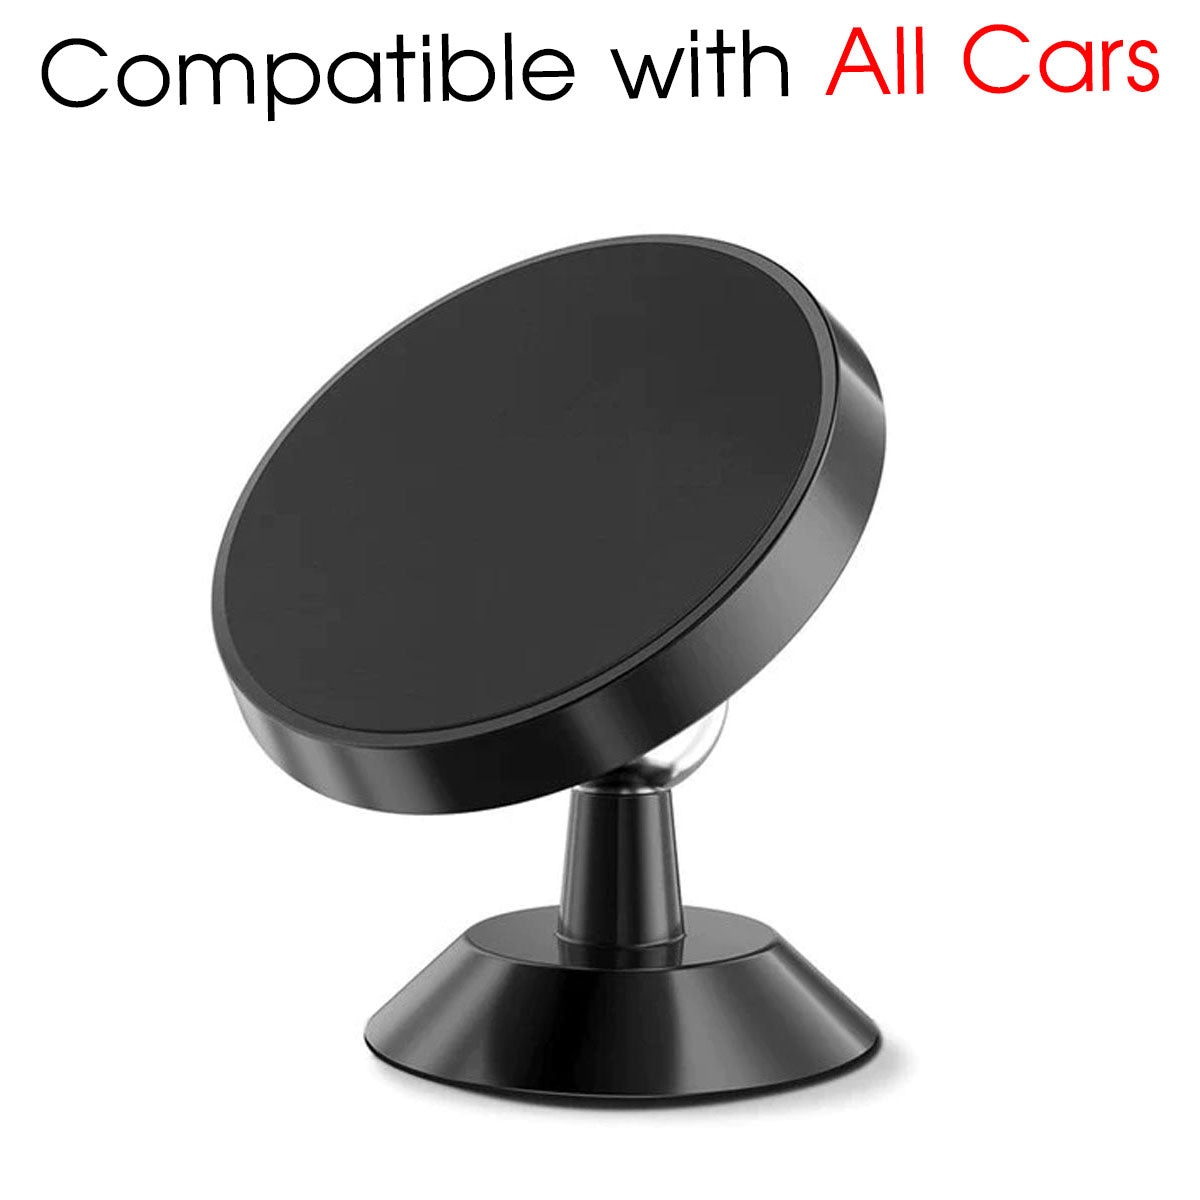 [2 Pack ] Magnetic Phone Mount, Custom For Cars, [ Super Strong Magnet ] [ with 4 Metal Plate ] car Magnetic Phone Holder, [ 360° Rotation ] Universal Dashboard car Mount Fits All Cell Phones, Car Accessories TY13982 - Delicate Leather